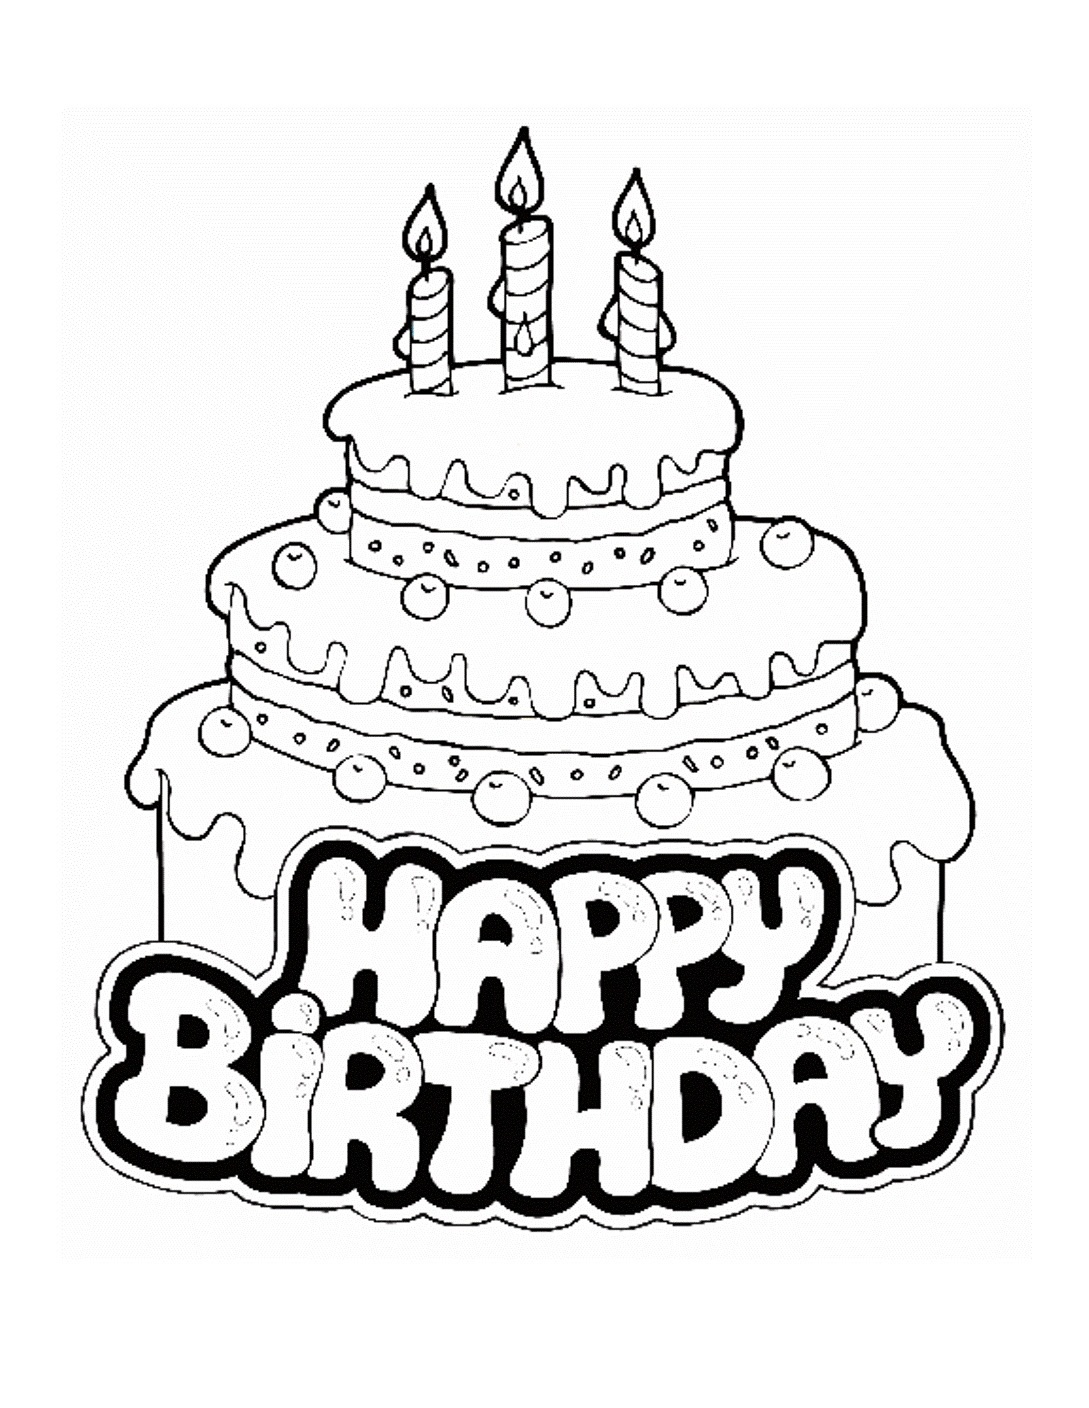 Free Printable Birthday Cake Coloring Pages For Kids - Free Printable Pictures Of Birthday Cakes